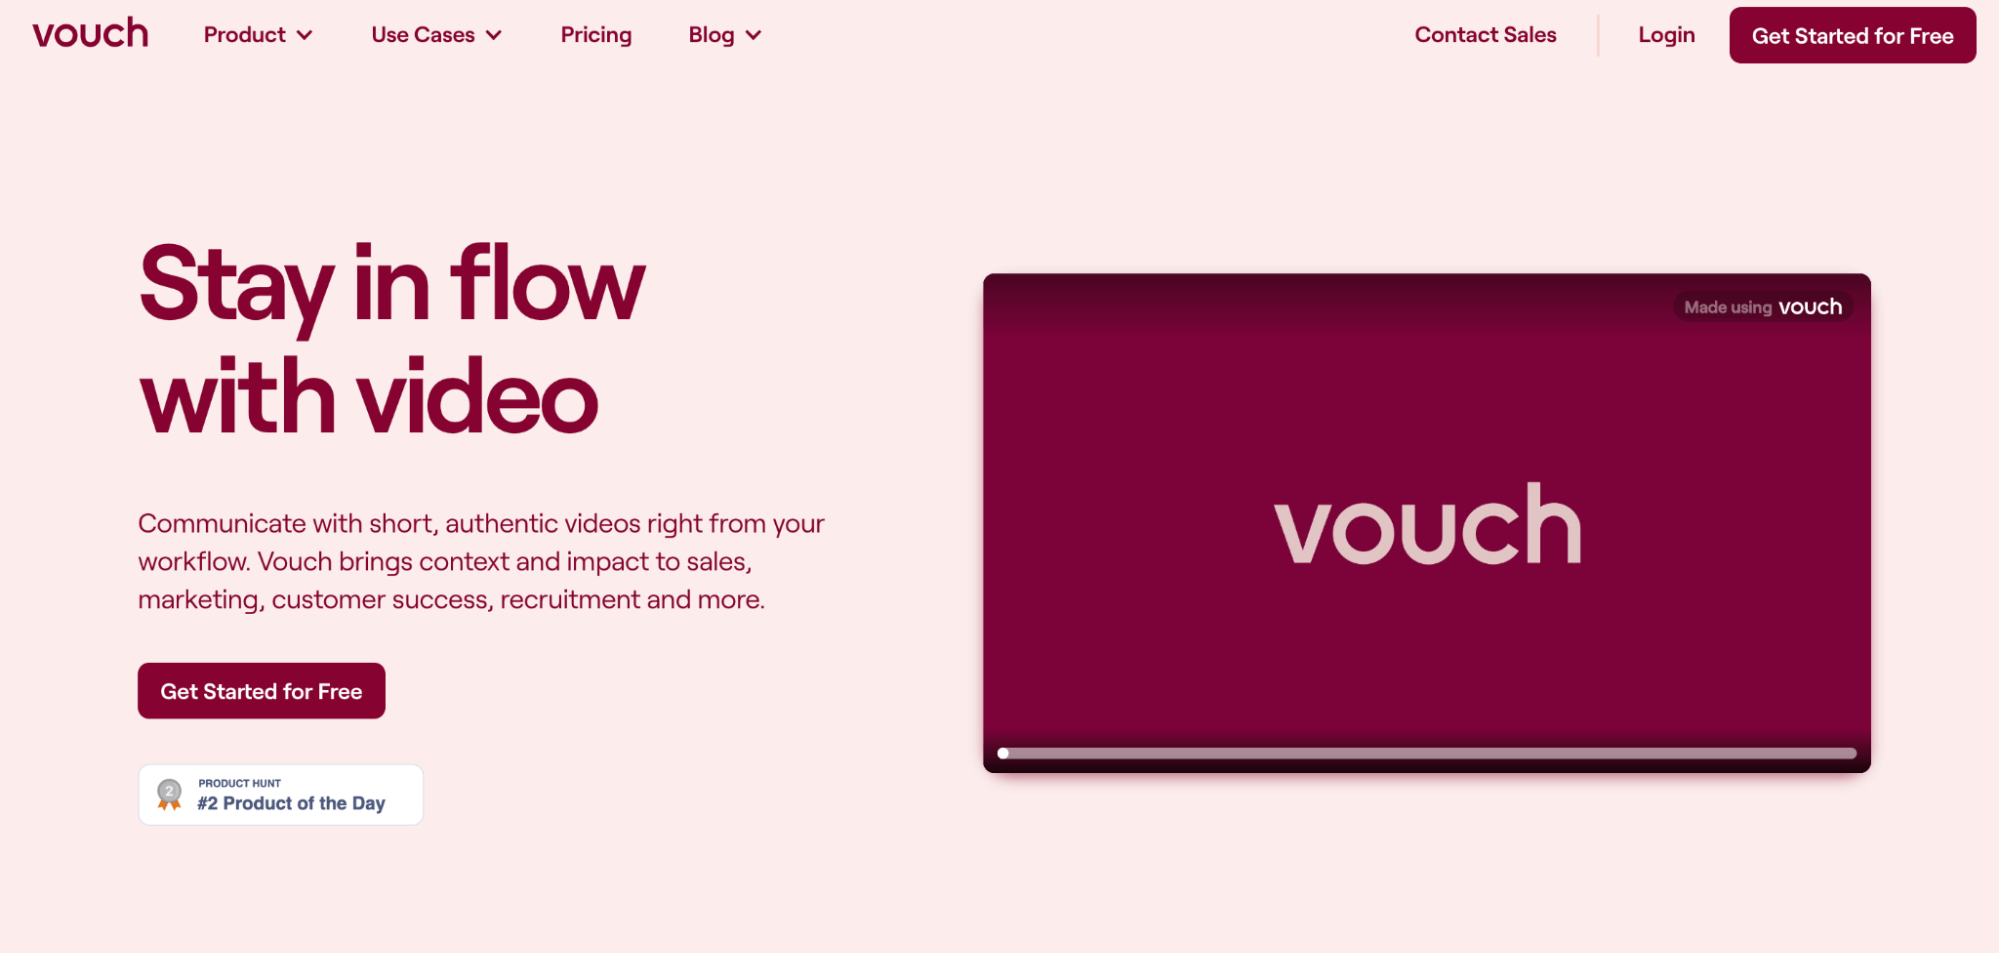 Vouch homepage: Stay in flow with video